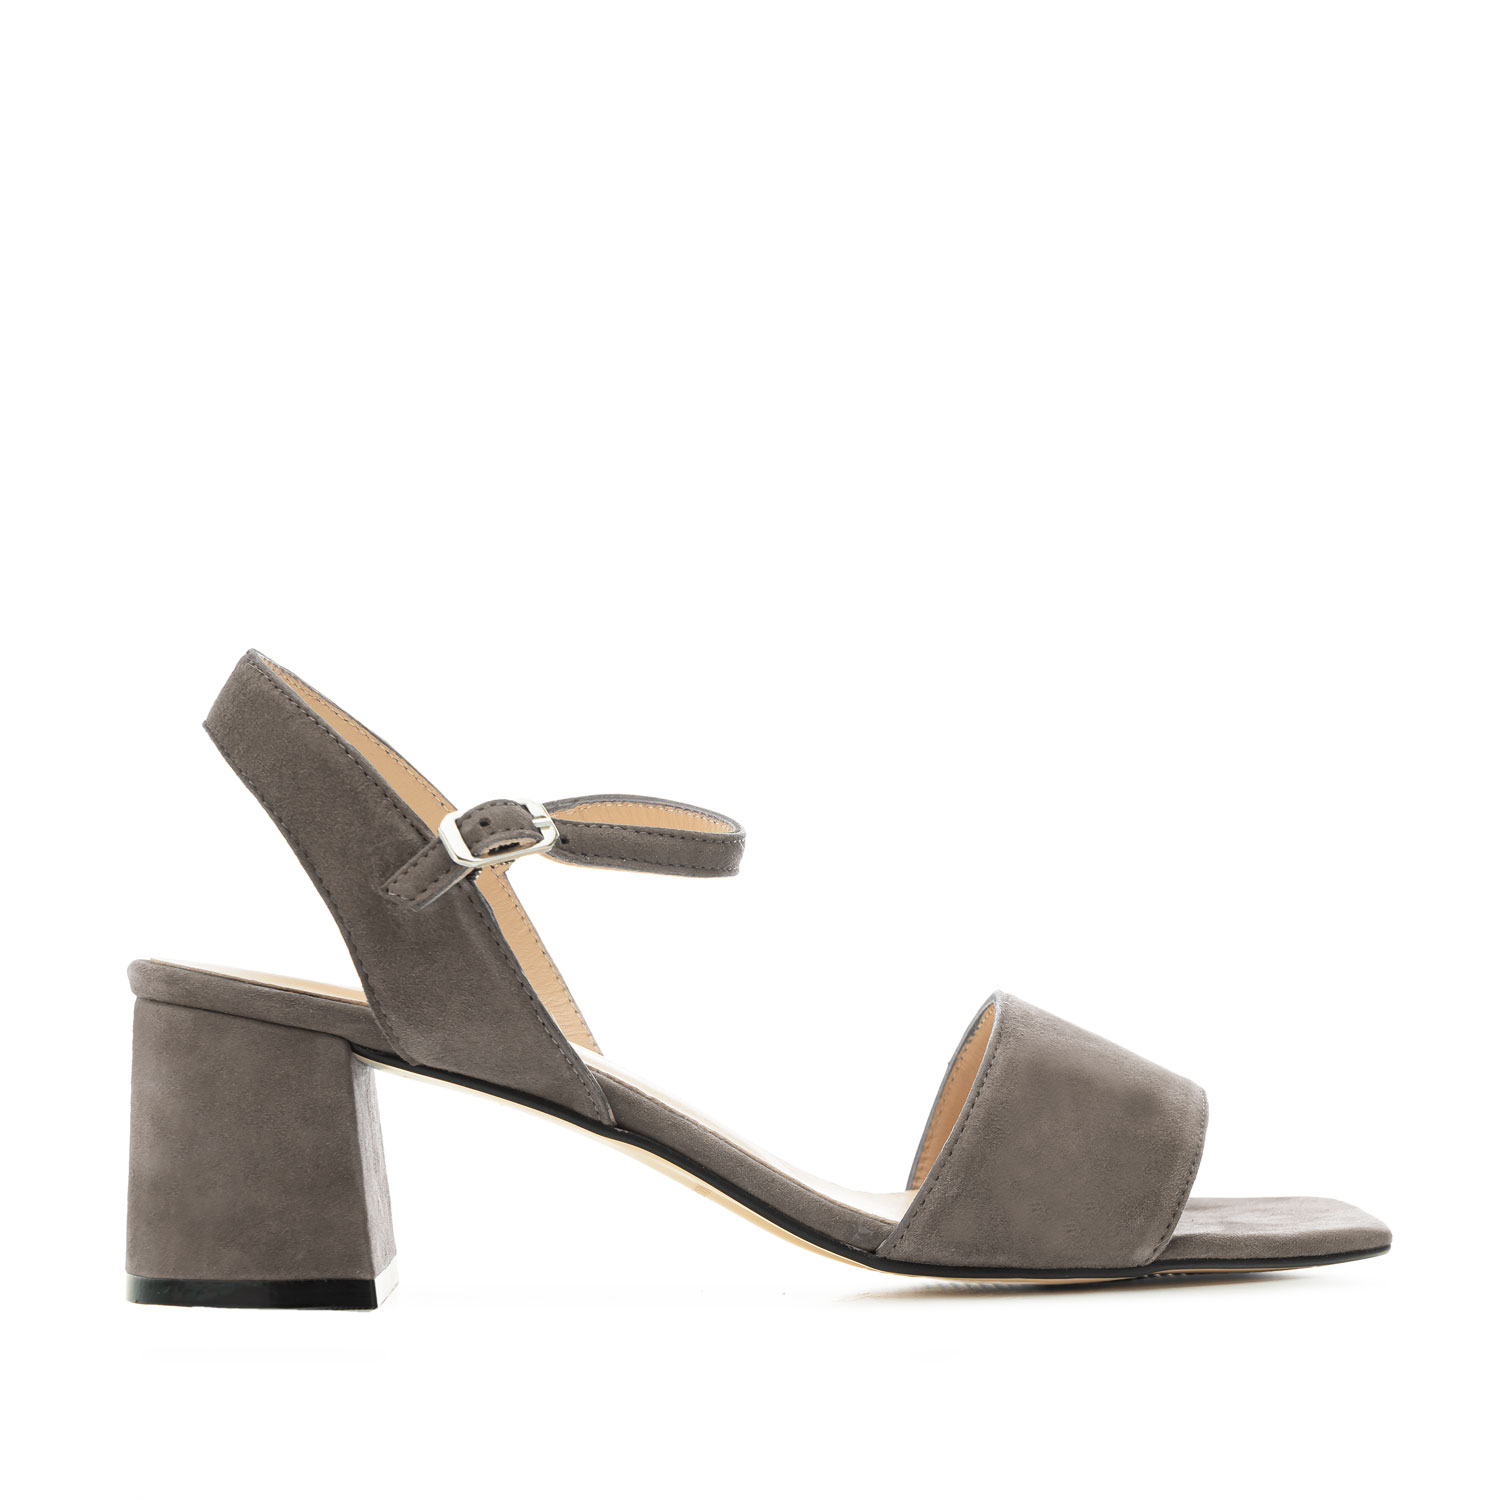 Block-heeled Sandals in Grey Suede Leather 